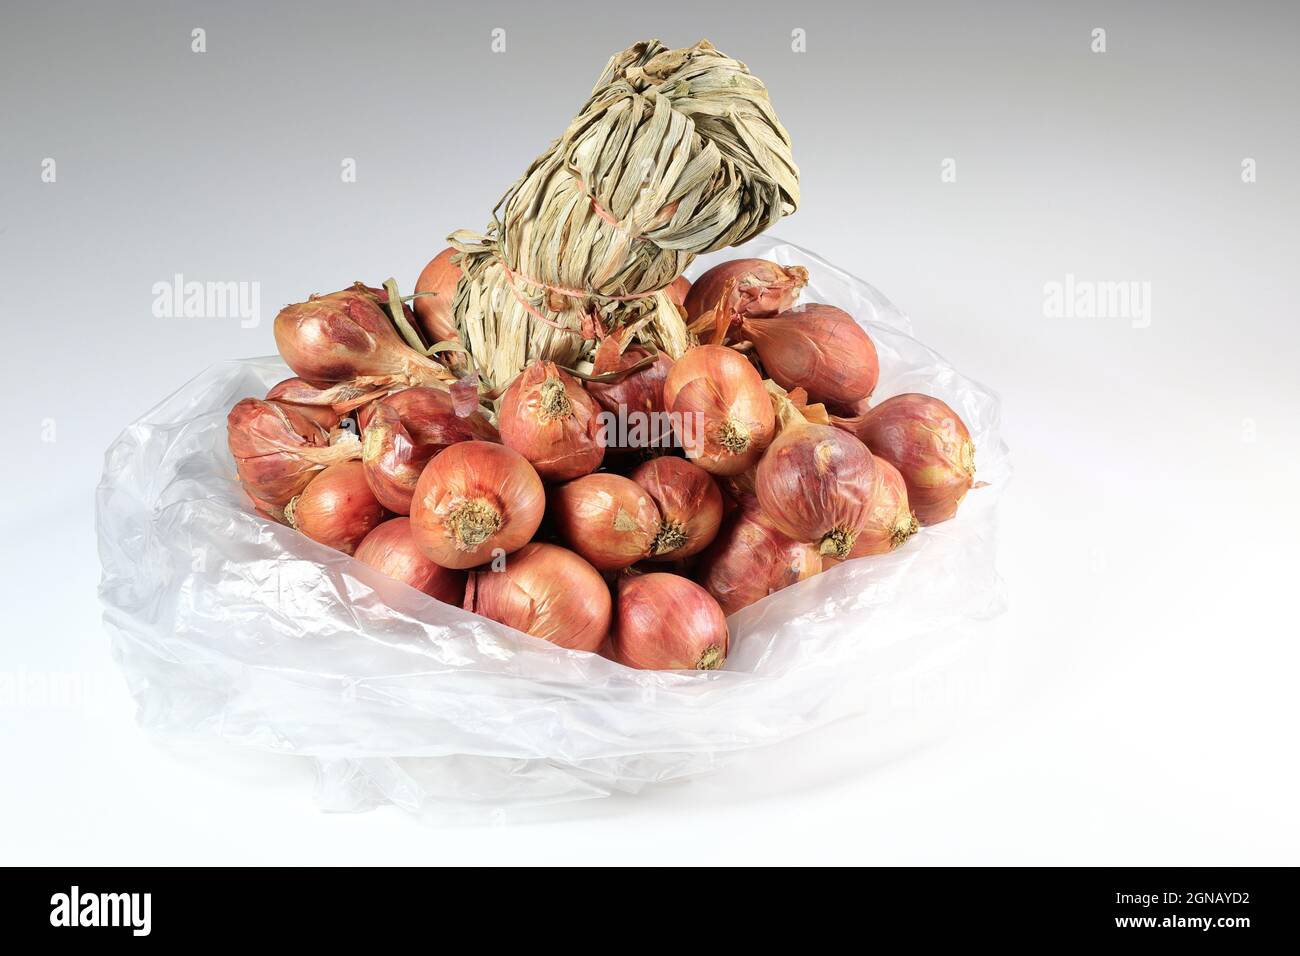 https://c8.alamy.com/comp/2GNAYD2/closeup-to-a-bunch-of-red-shallot-onions-in-white-plastic-bag-shallot-onions-in-a-group-isolated-on-white-background-spices-cooking-shallot-fresh-2GNAYD2.jpg